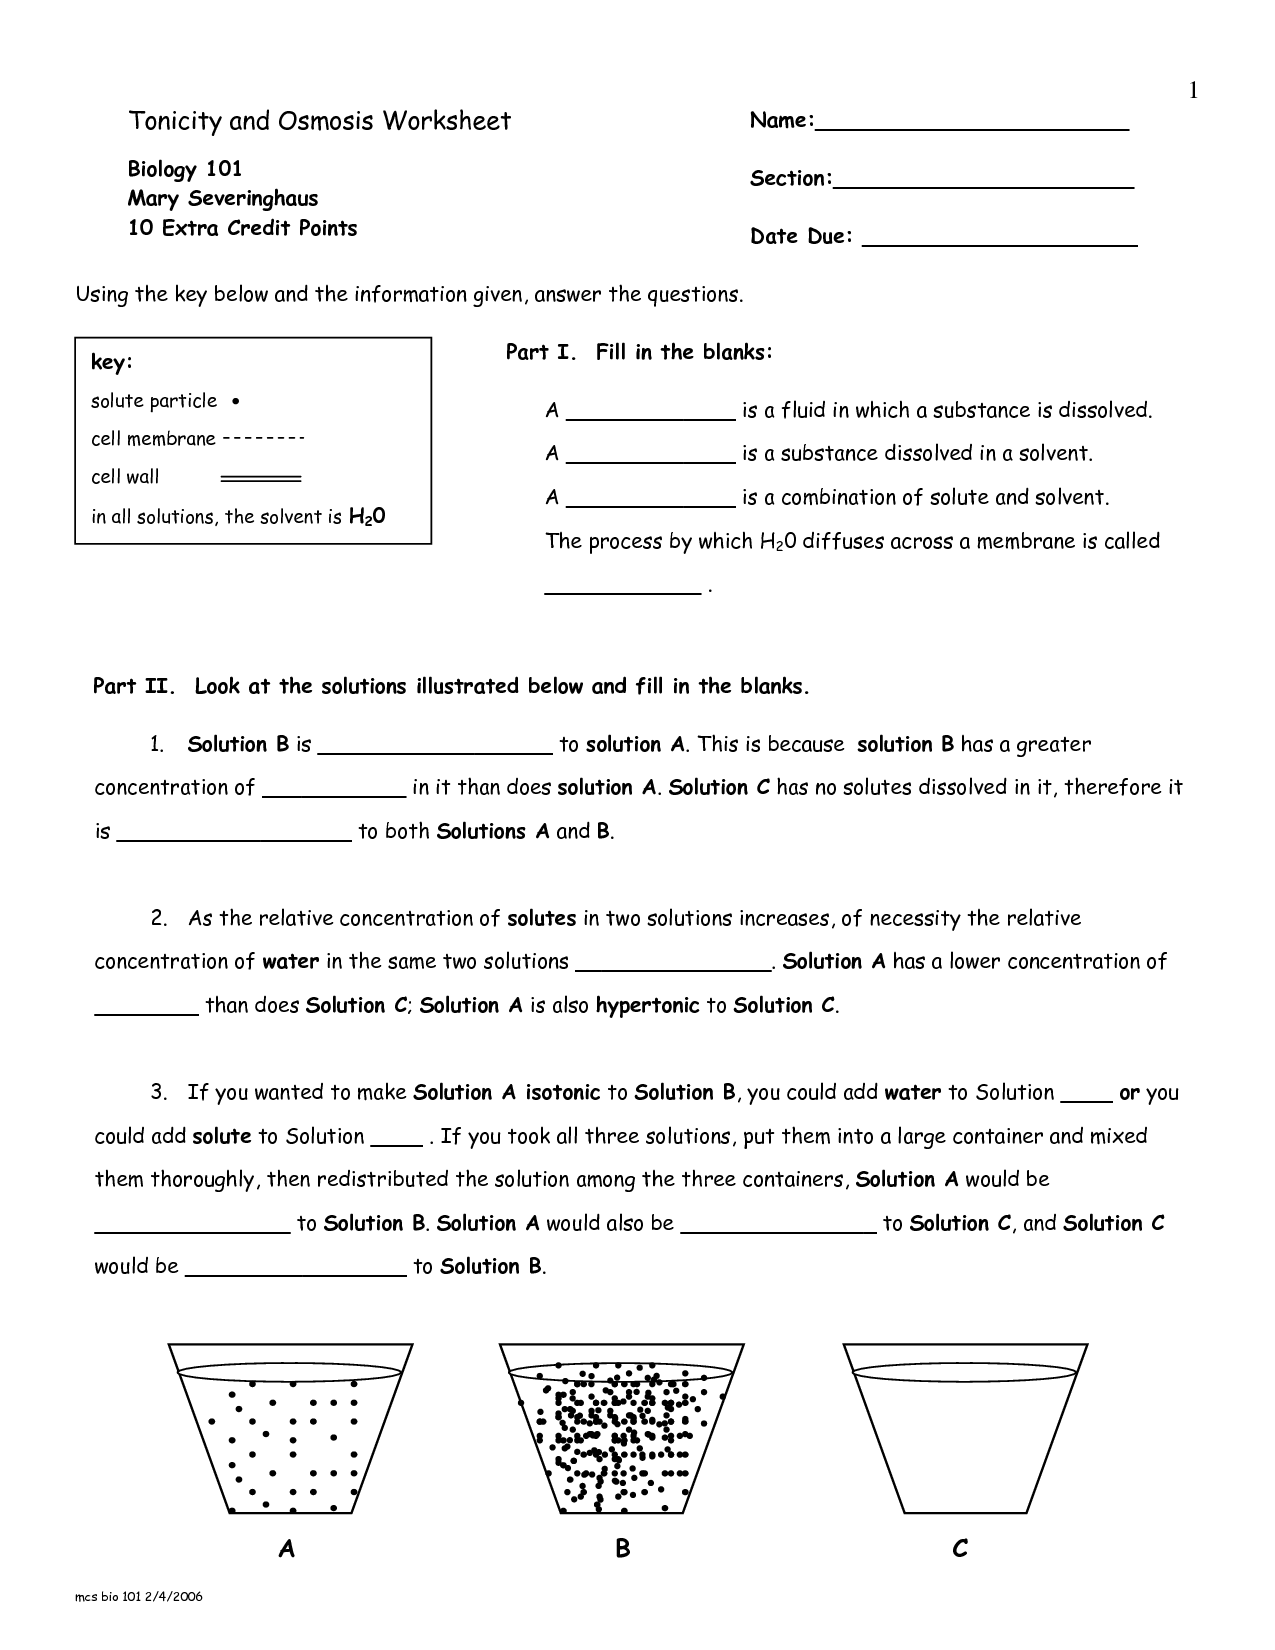 13 Best Images Of Diffusion Worksheet Key Osmosis And Tonicity Worksheet Answer Key Diffusion 